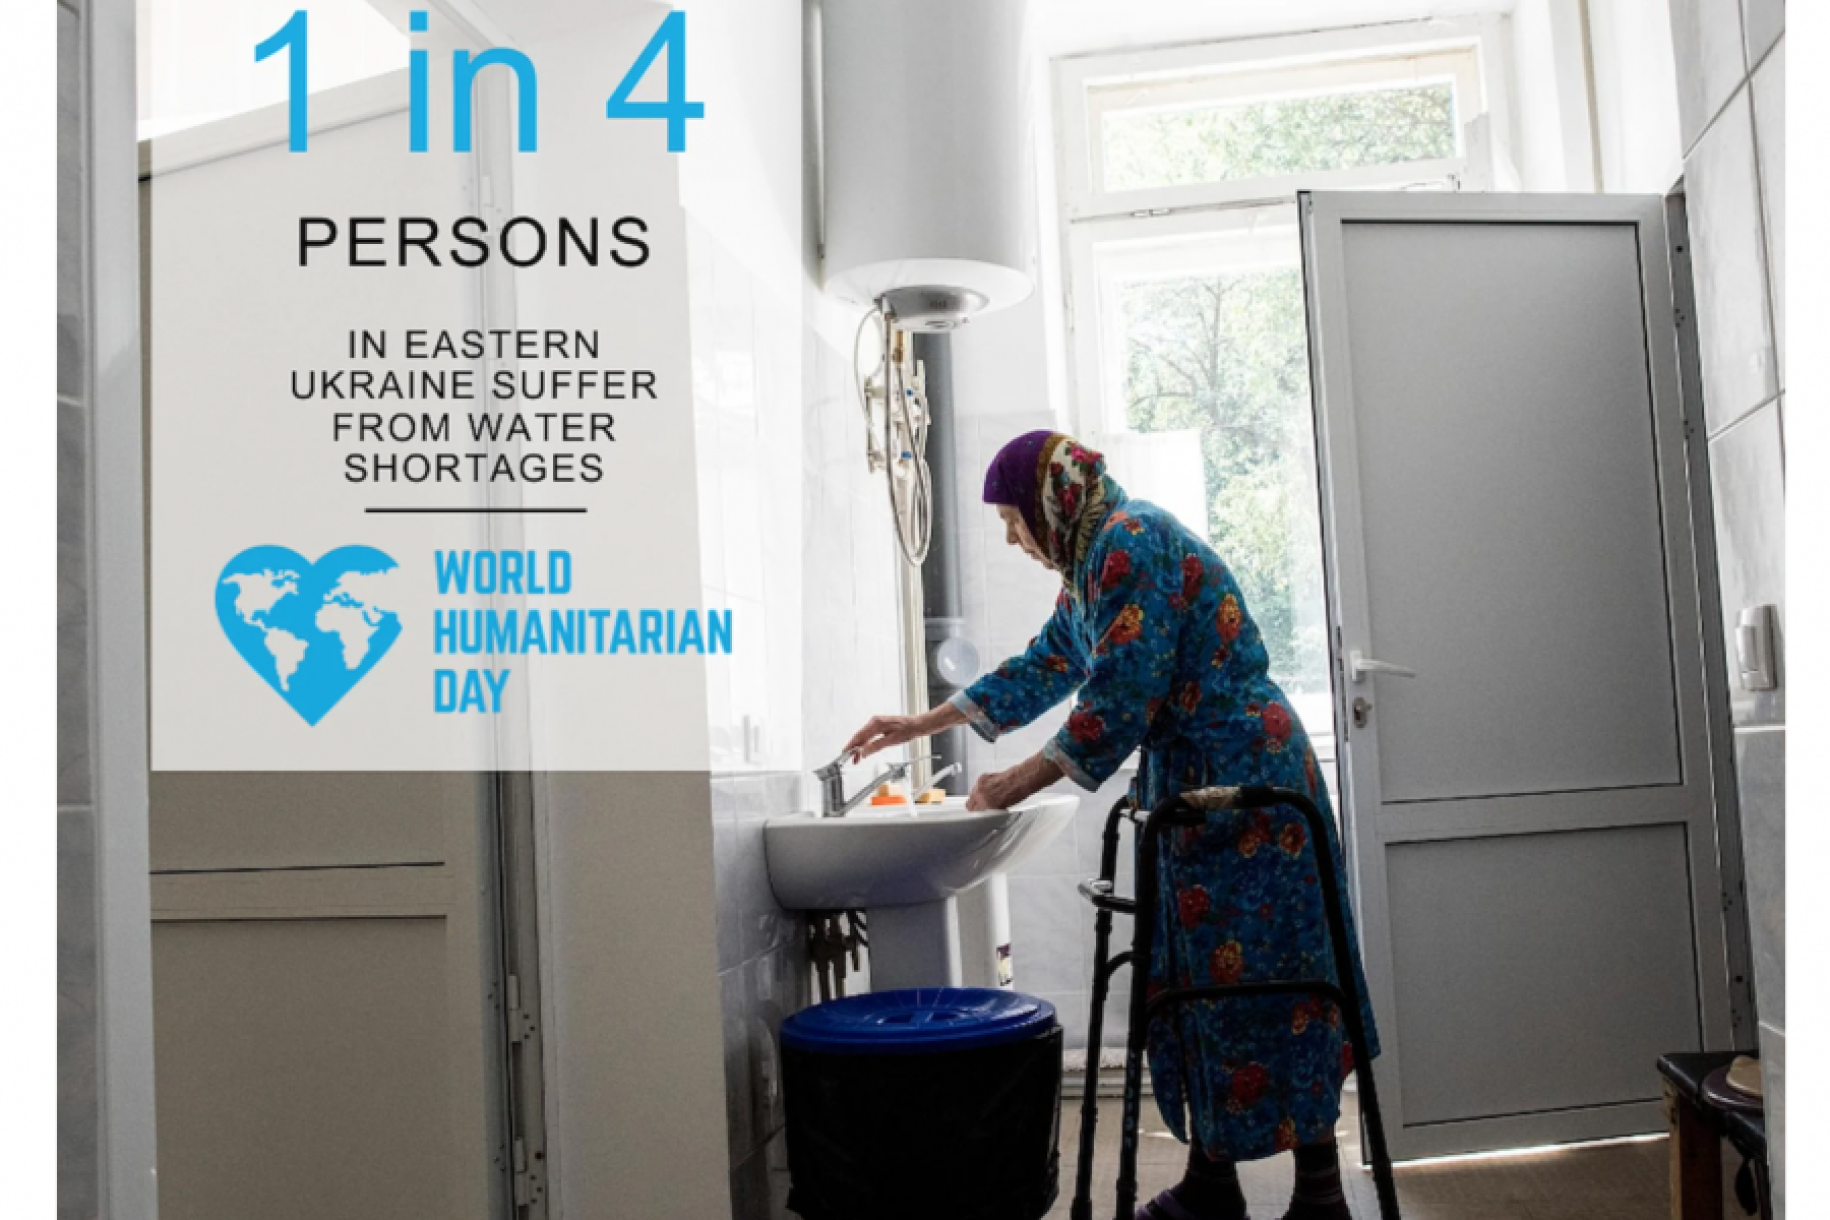 Photo of a woman with a walker at a sink washing her hands. A factoid on the left of the photo says 1 in 4 persons in eastern Ukraine suffer from water shortages.